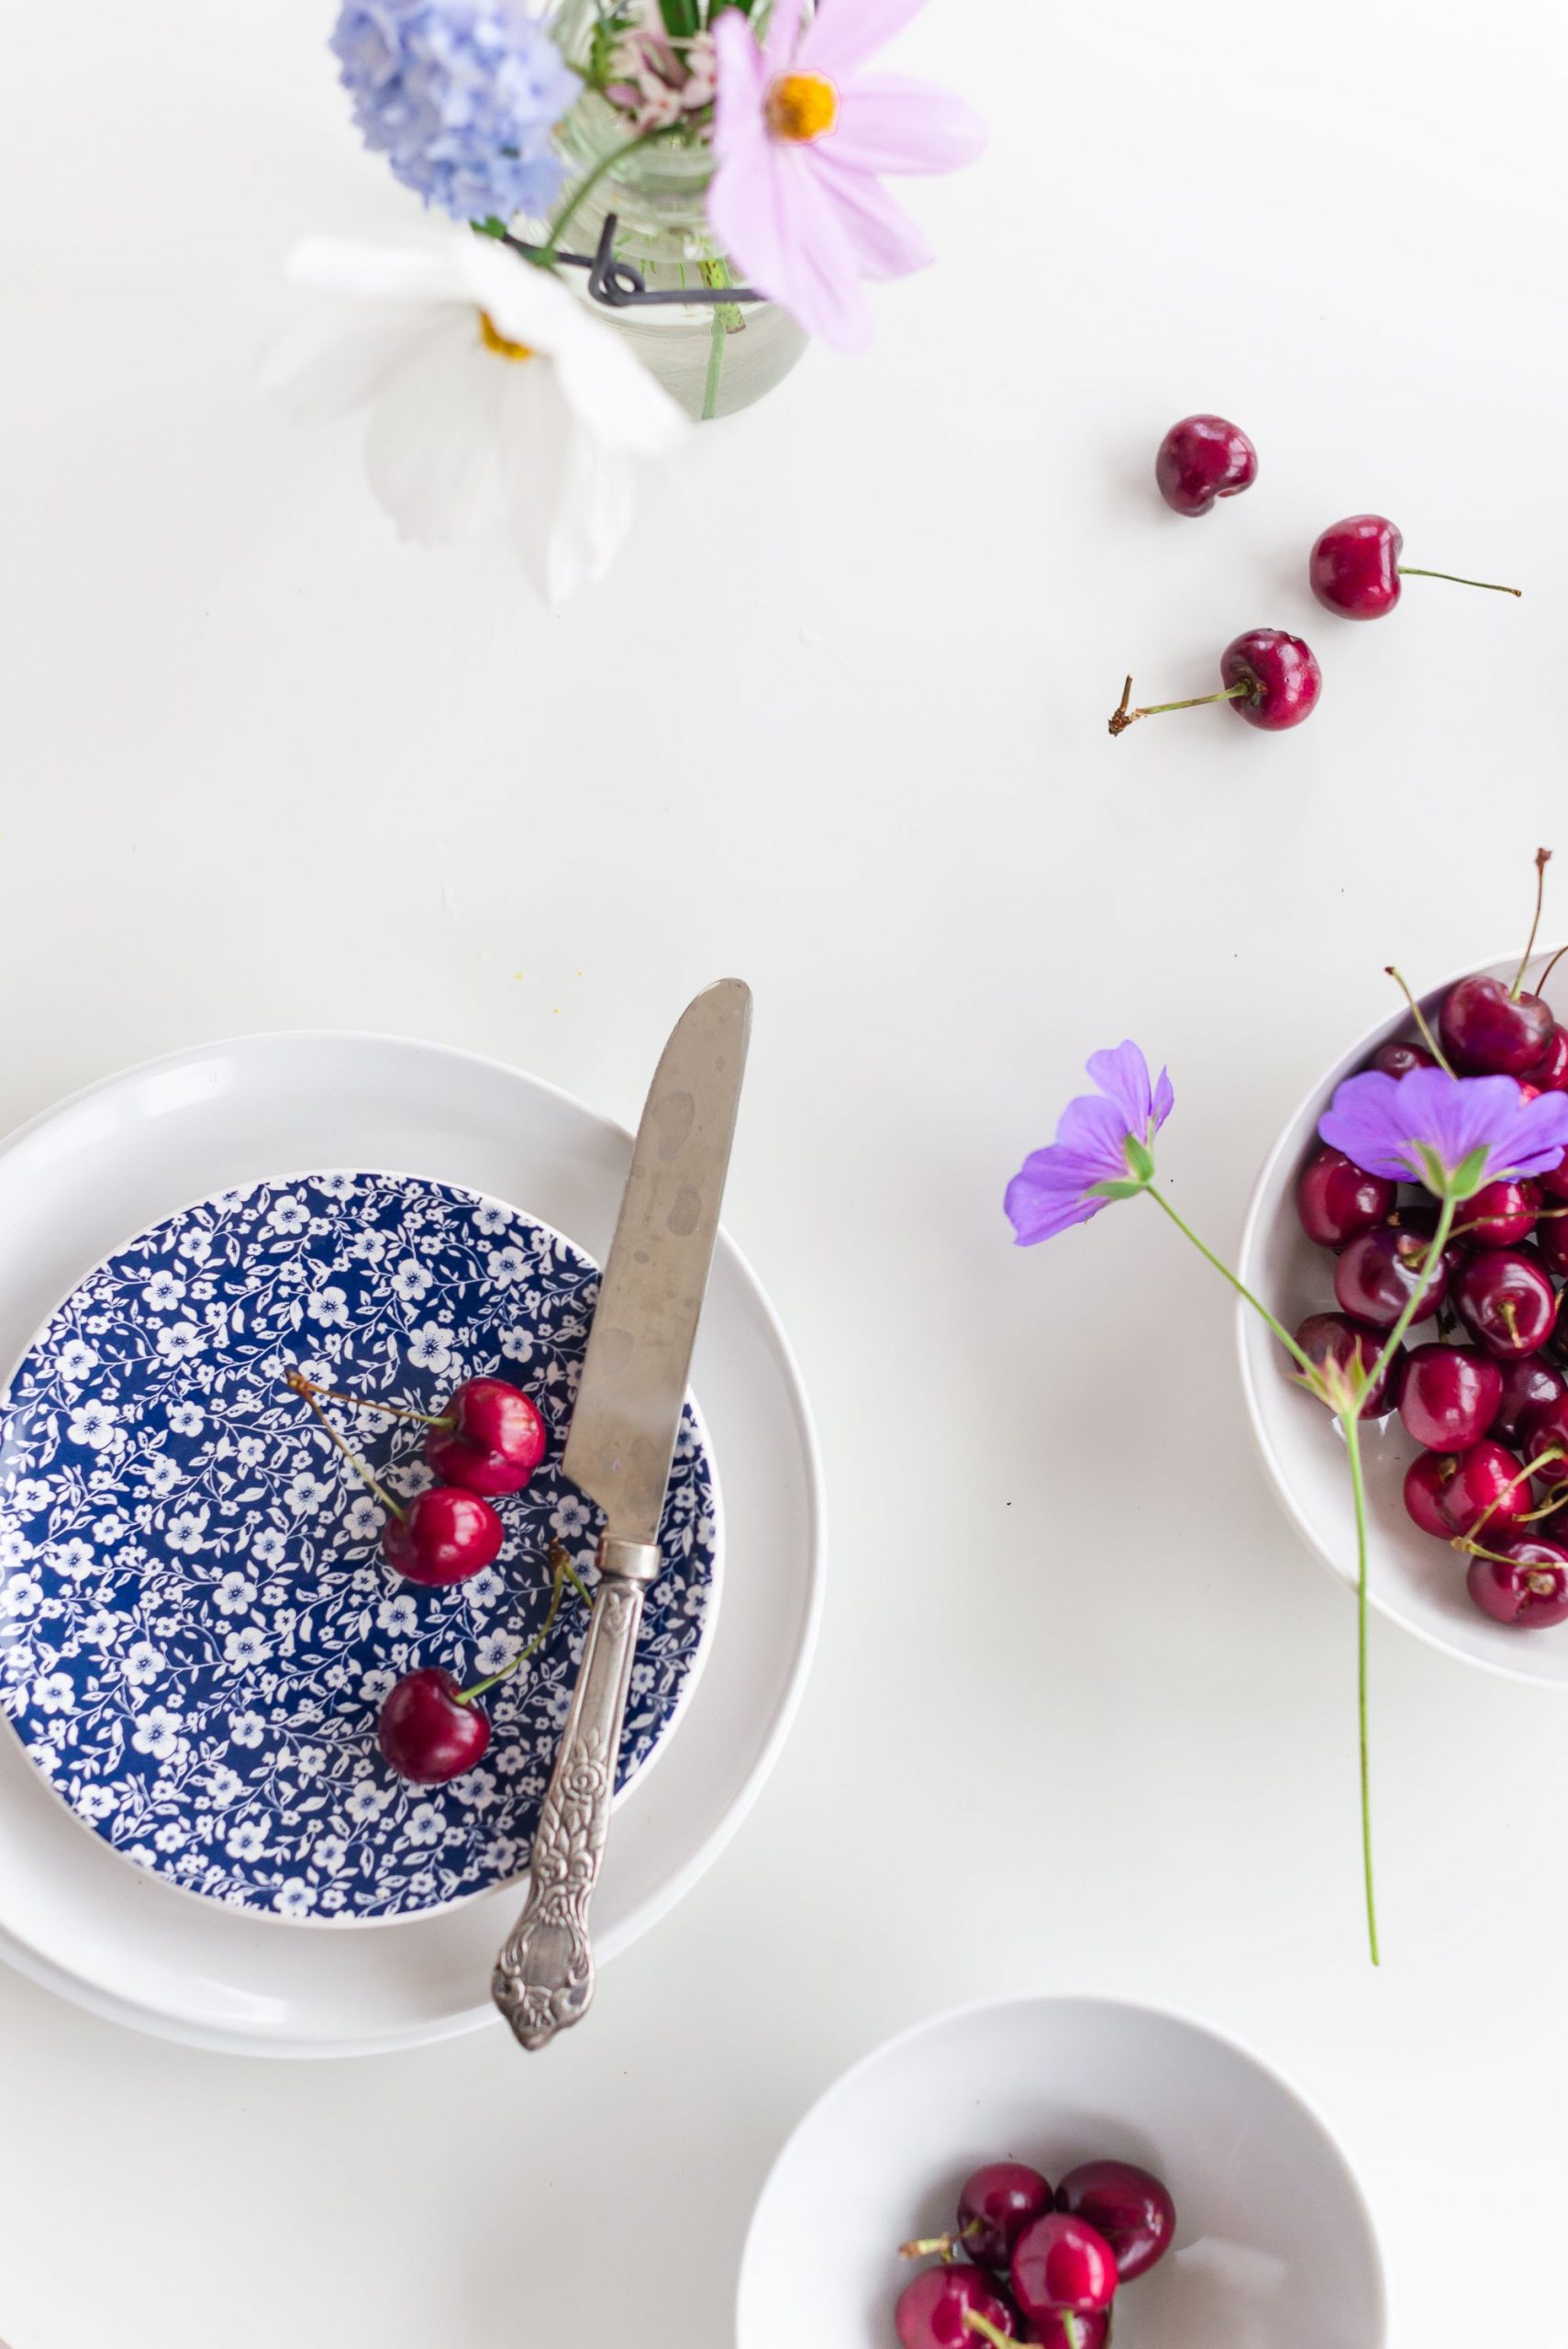 Baking with Dark Cherries #inspiration #food styling #food ...